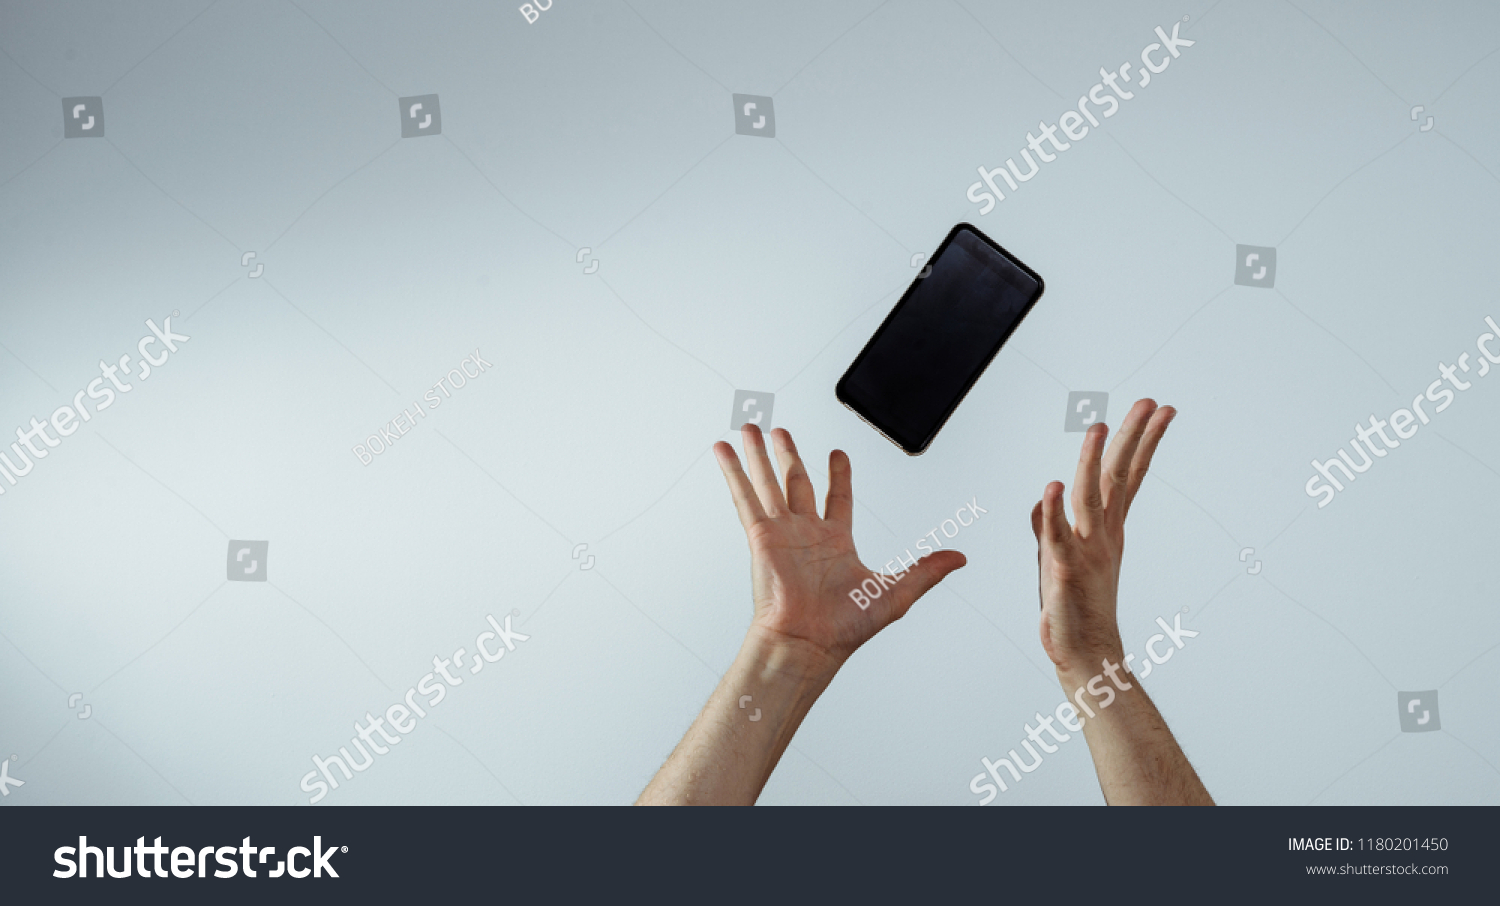 A view of the hand that tosses or catches a mobile phone. The smartphone is falling, hands are trying to catch it. The concept of communication, attempts to connect and talk. #1180201450